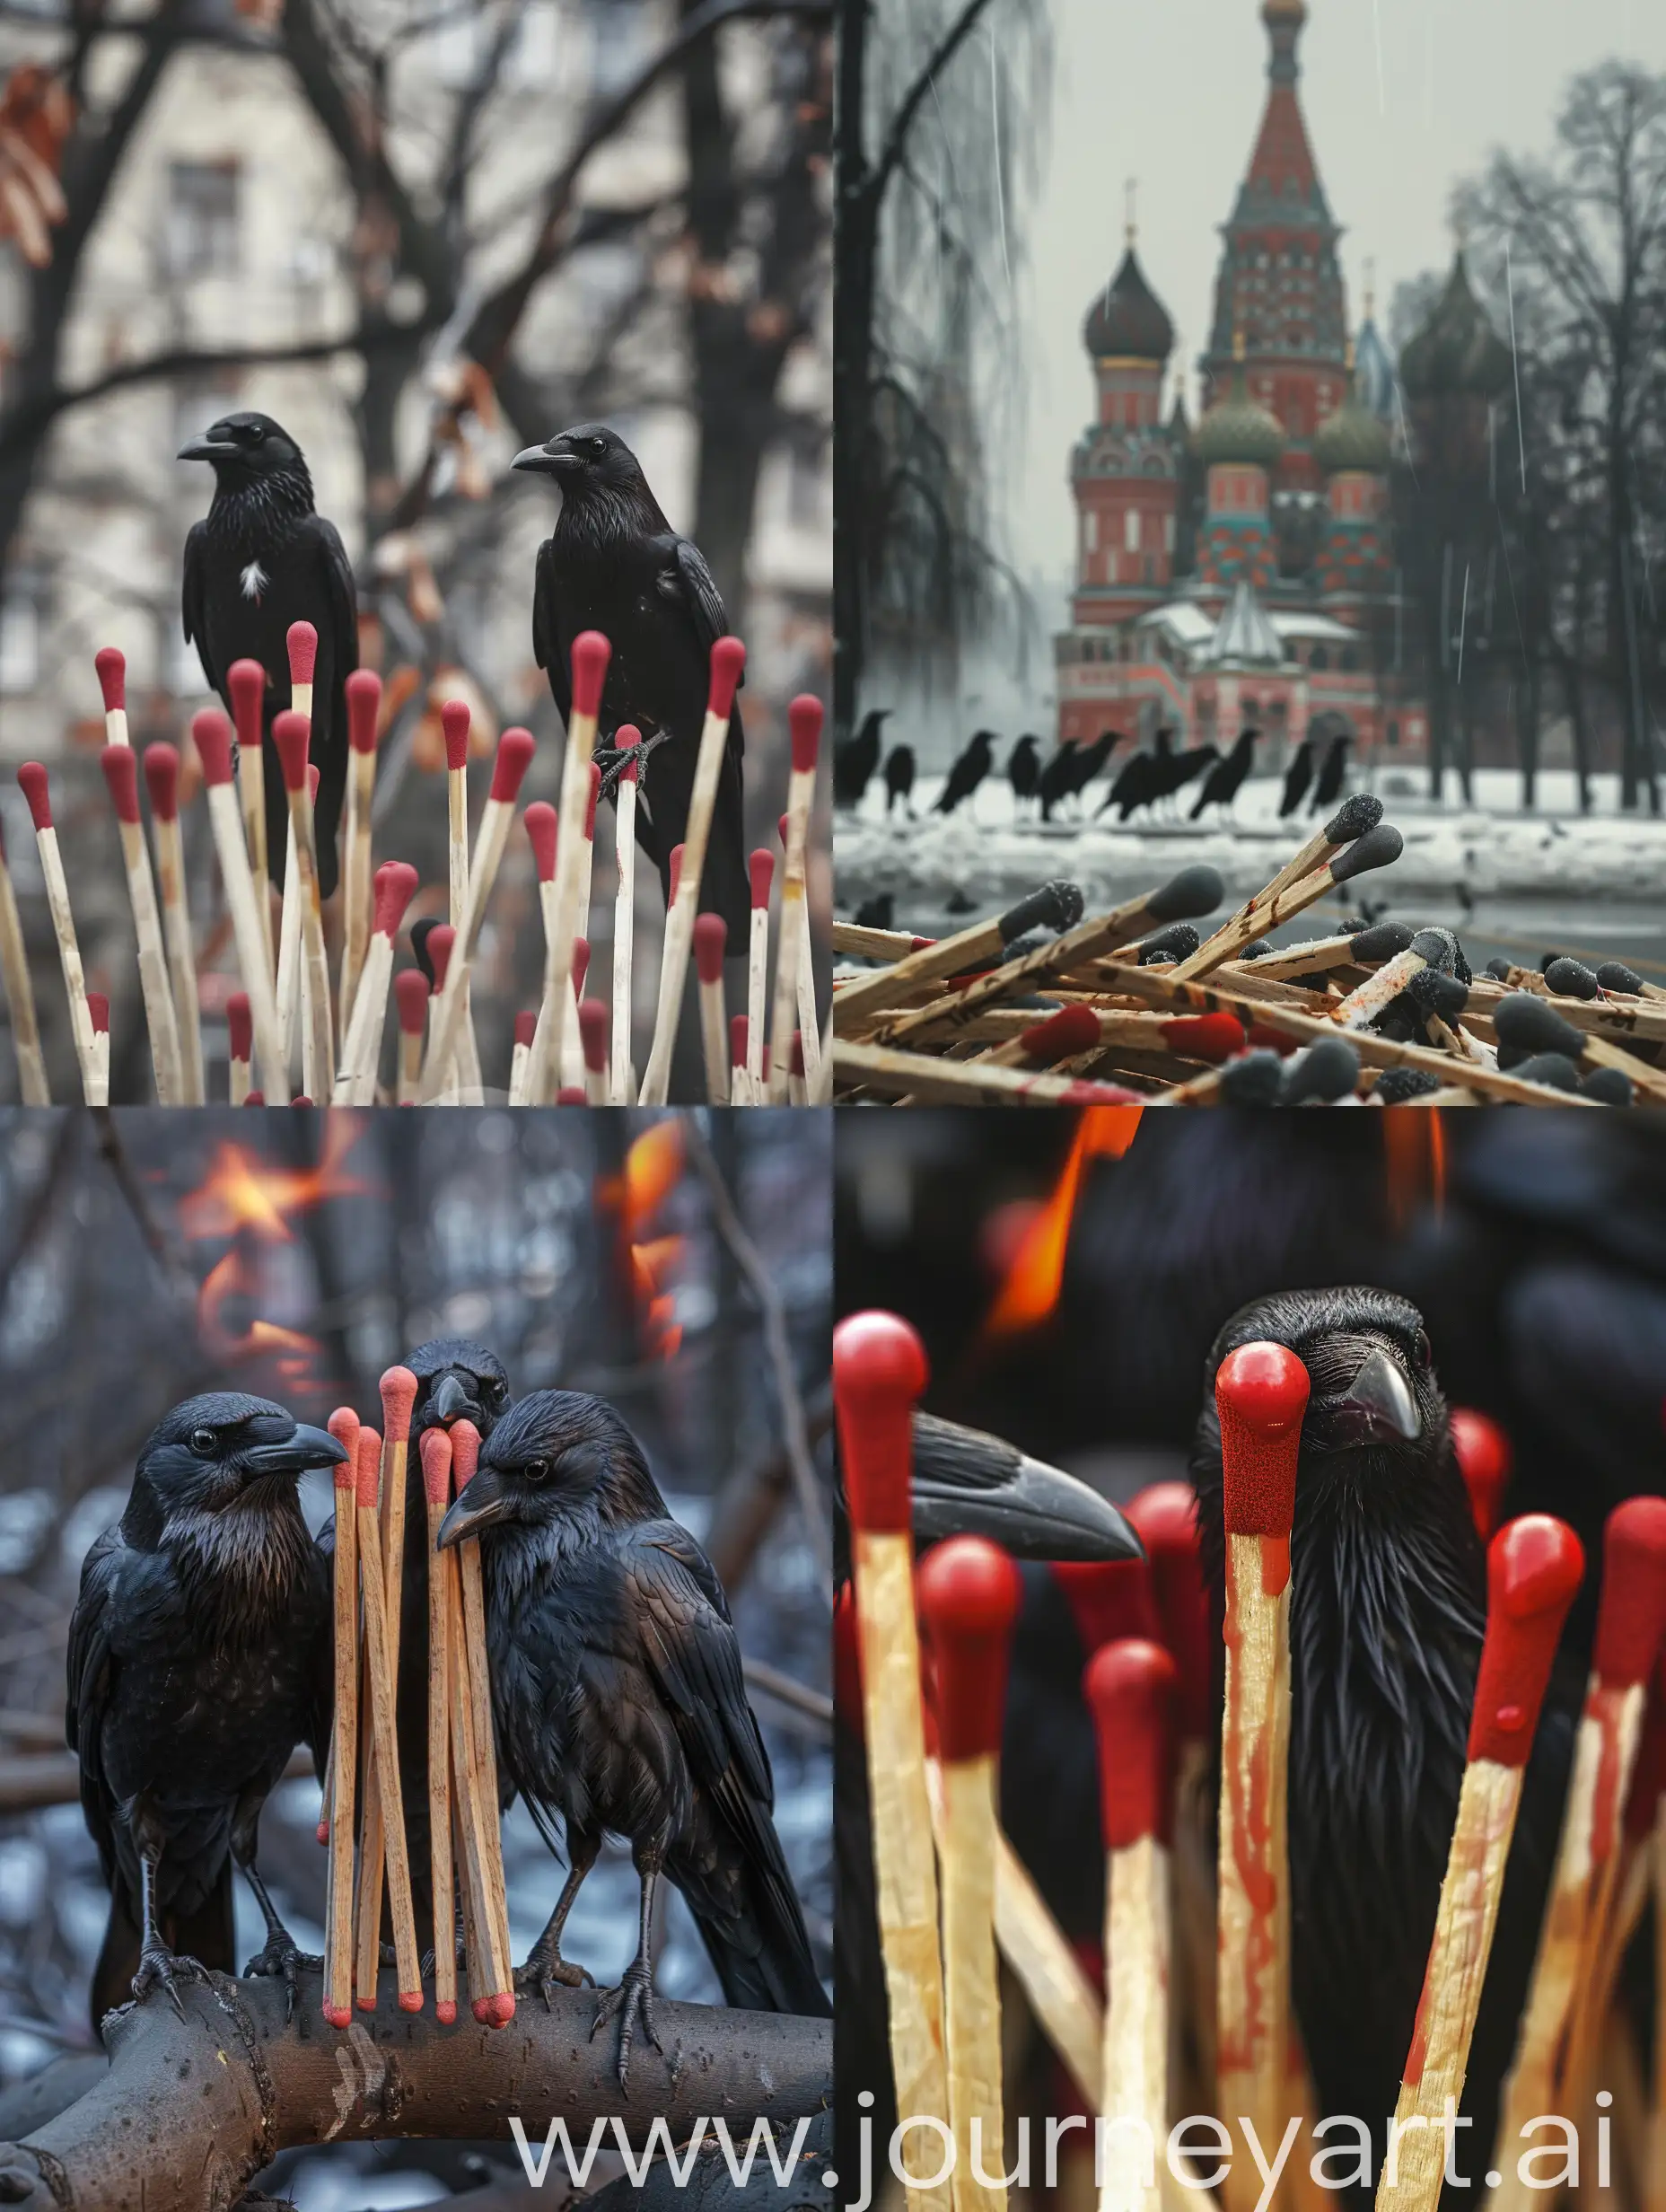 Moscow-Crows-Disrupt-Sleep-Amidst-Soaked-Ruins